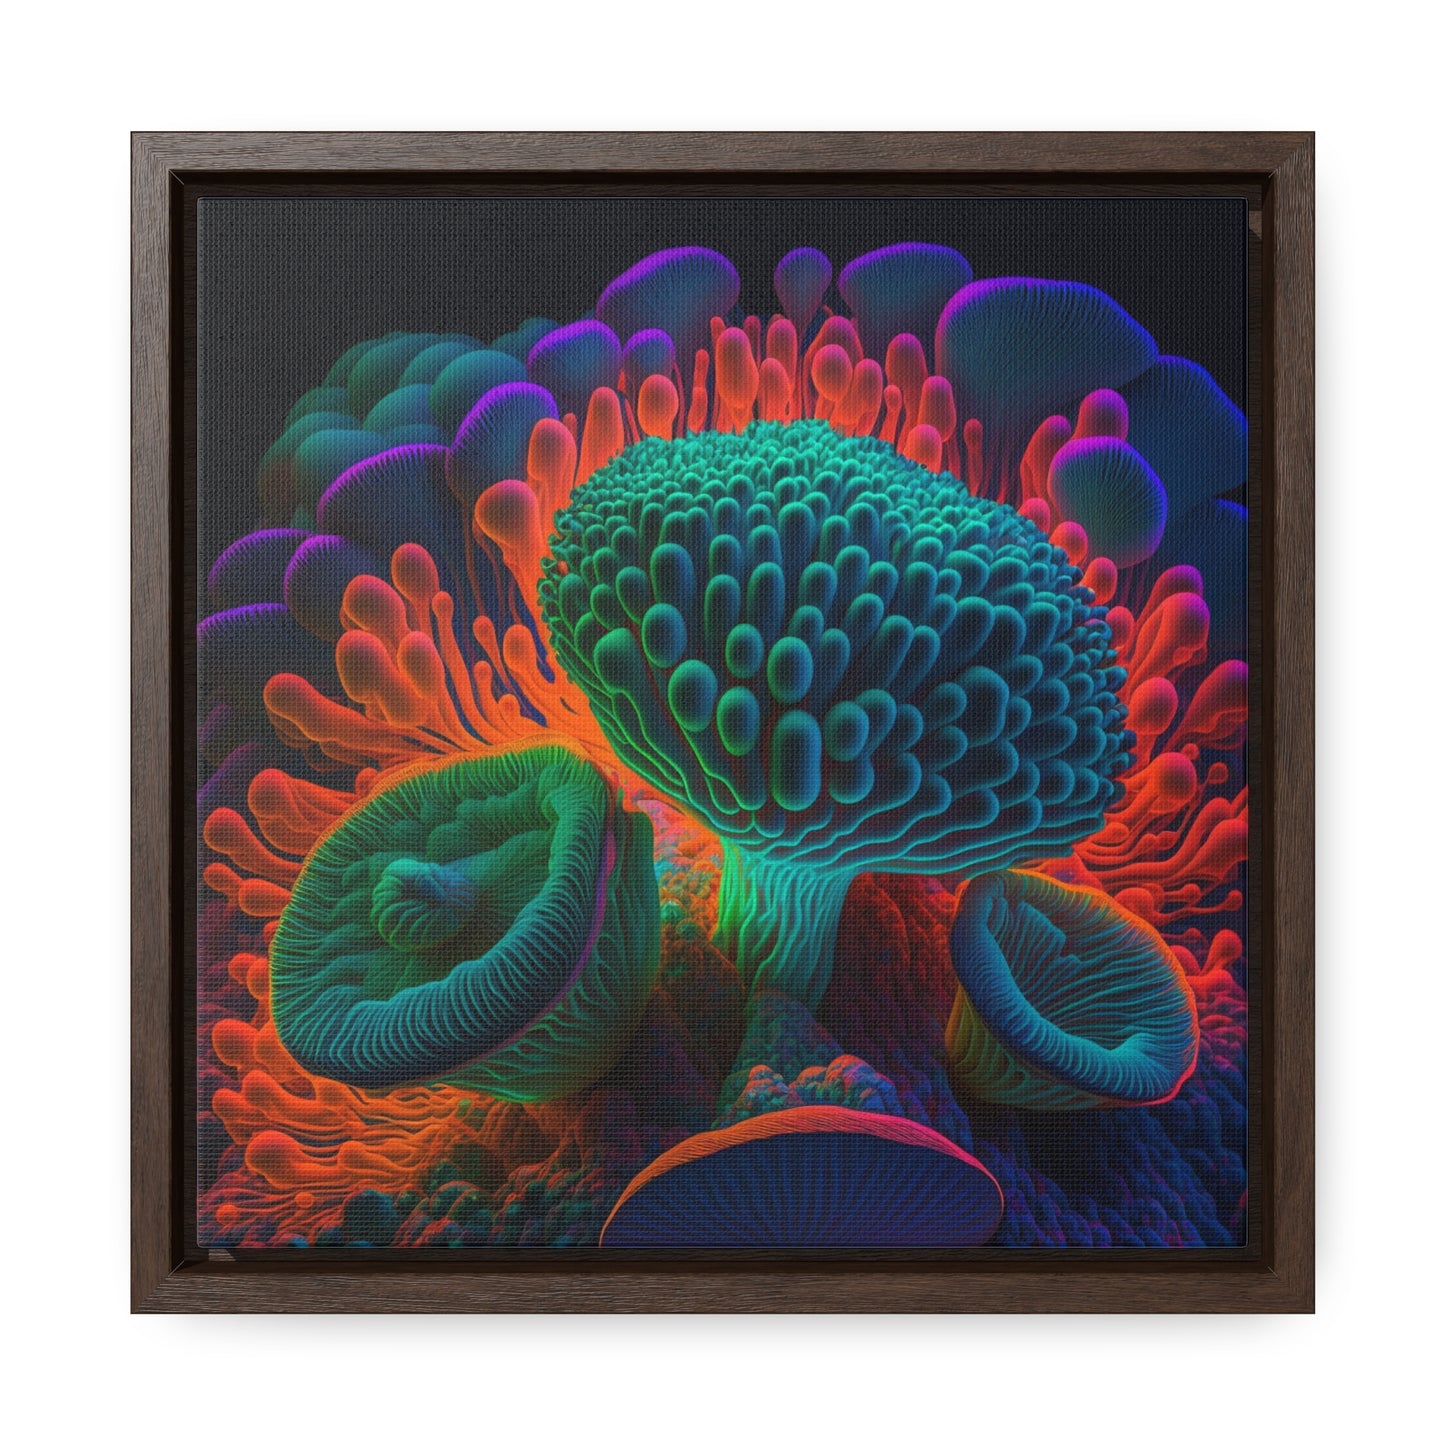 Gallery Canvas Wraps, Square Frame Macro Reef Florescent 3